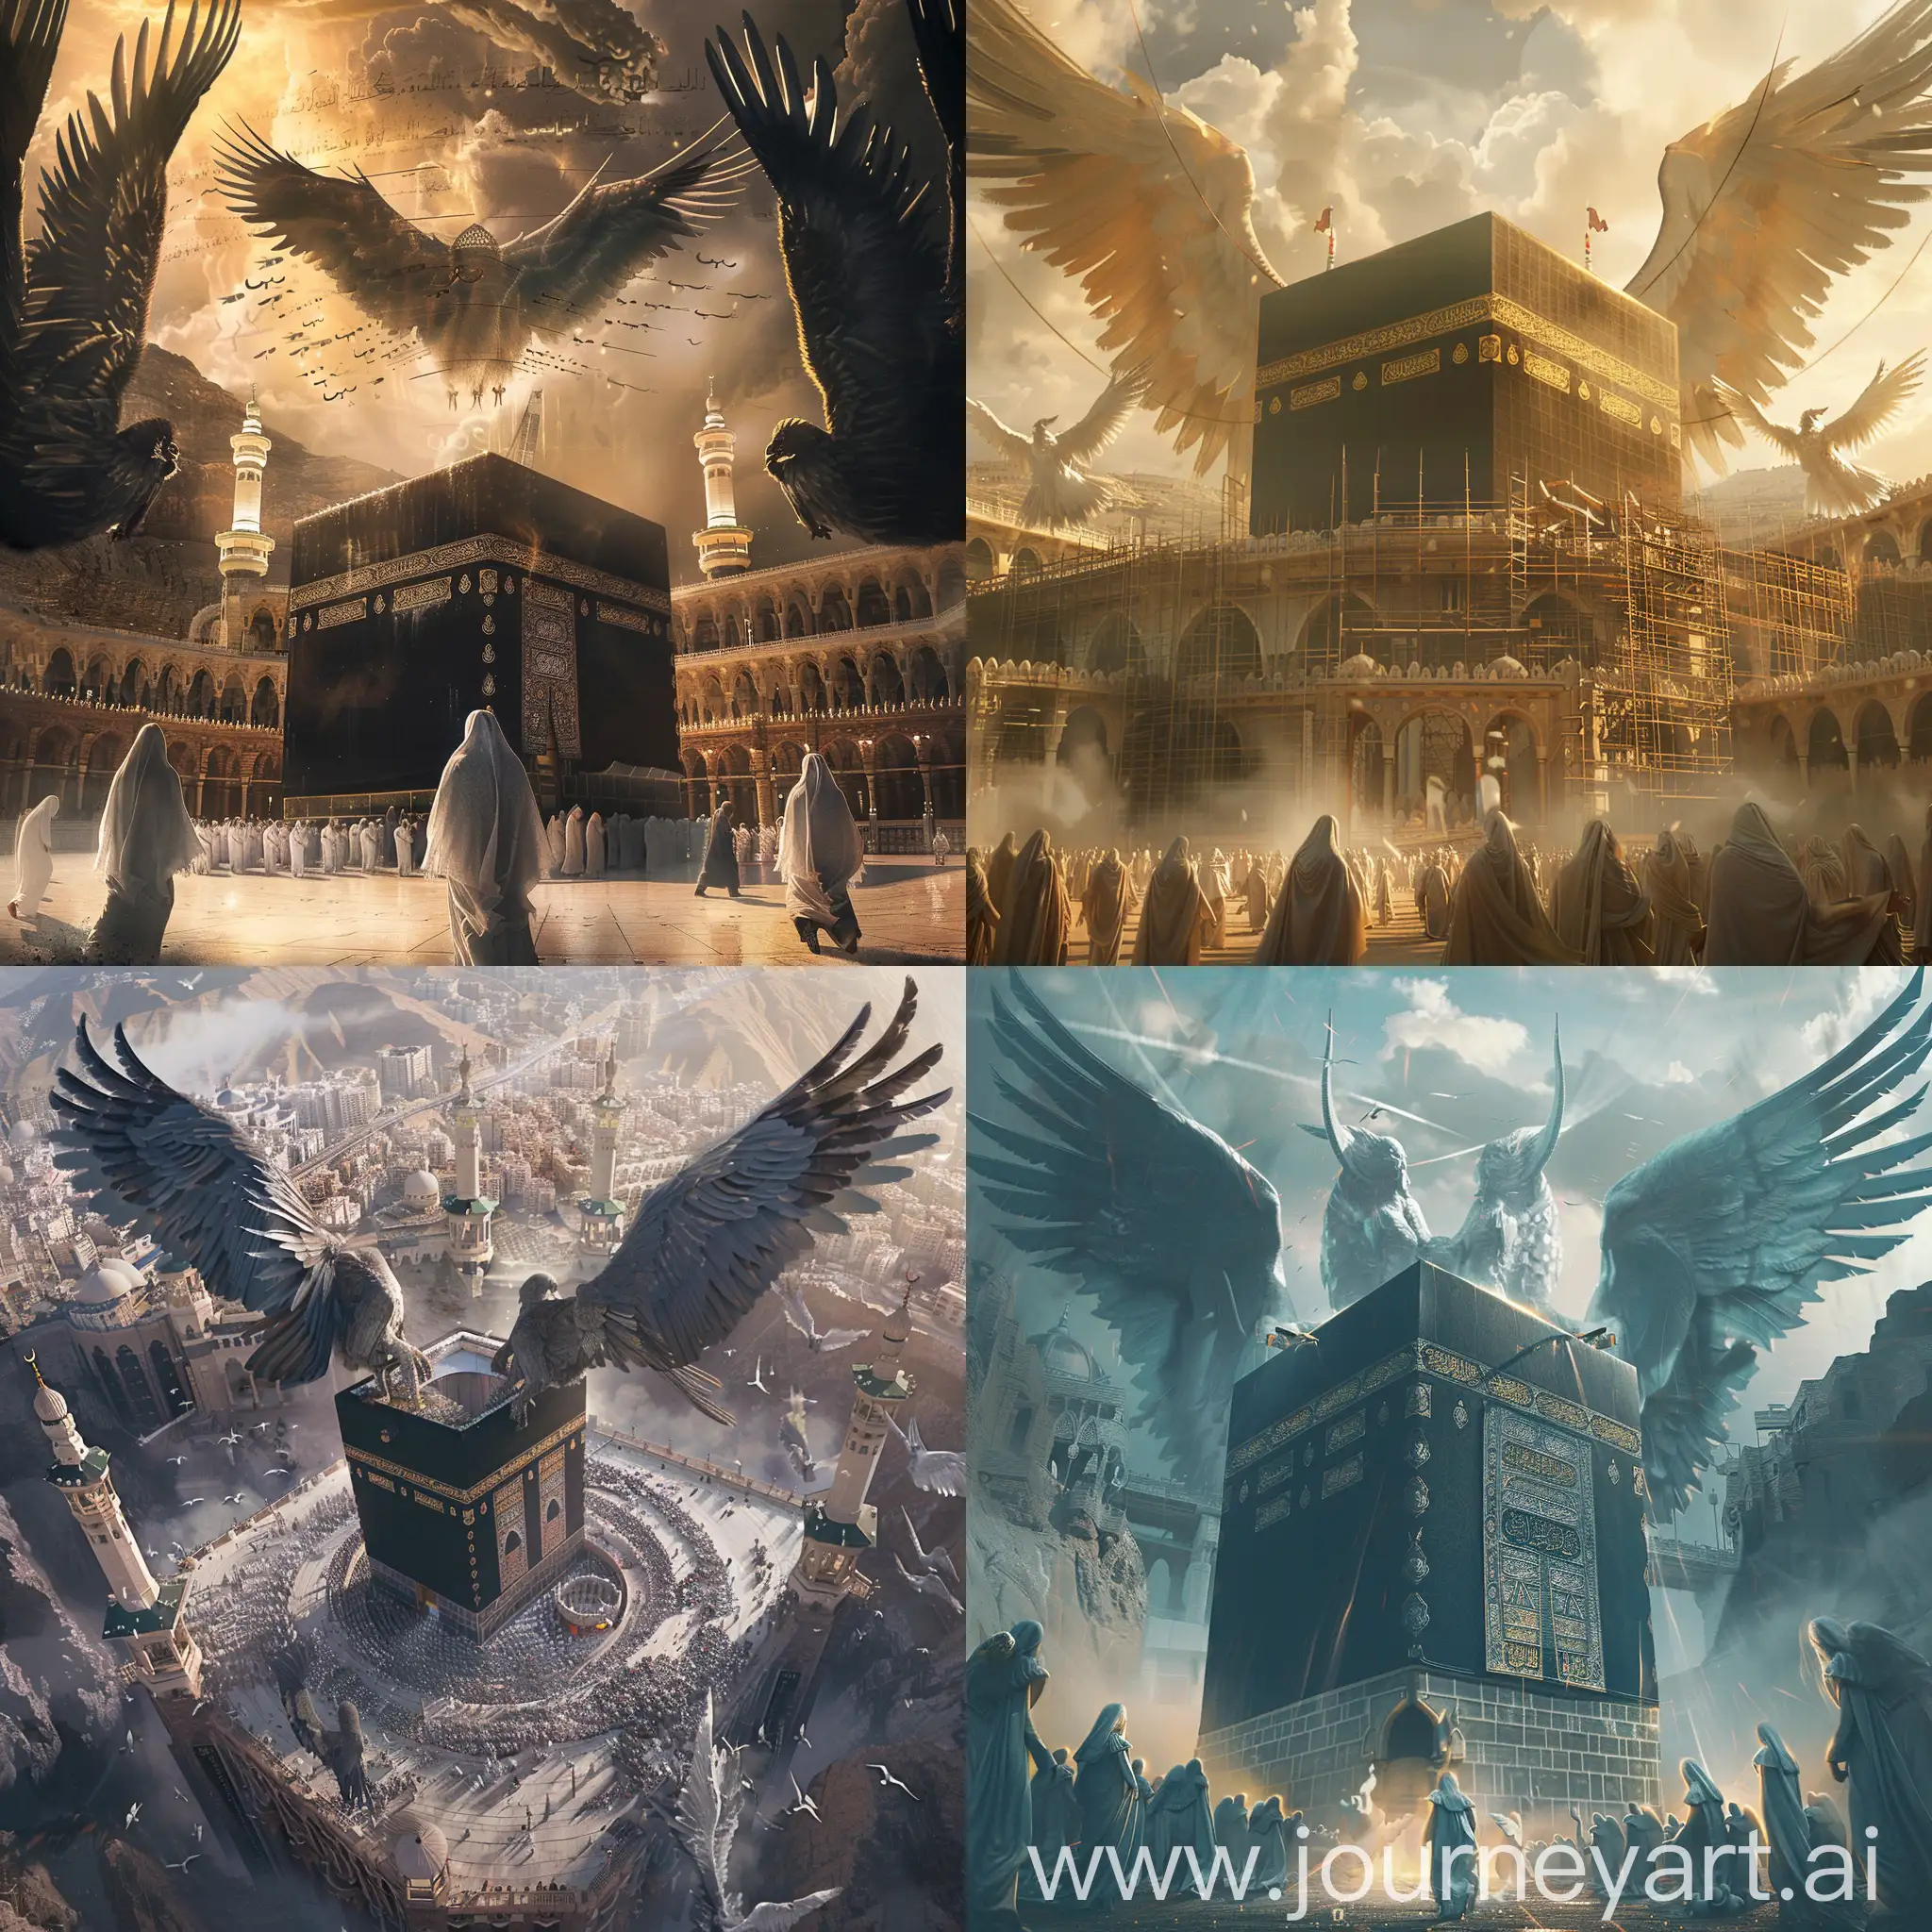 Majestic-Angels-Building-the-Kaaba-Mysterious-Cinematic-Artwork